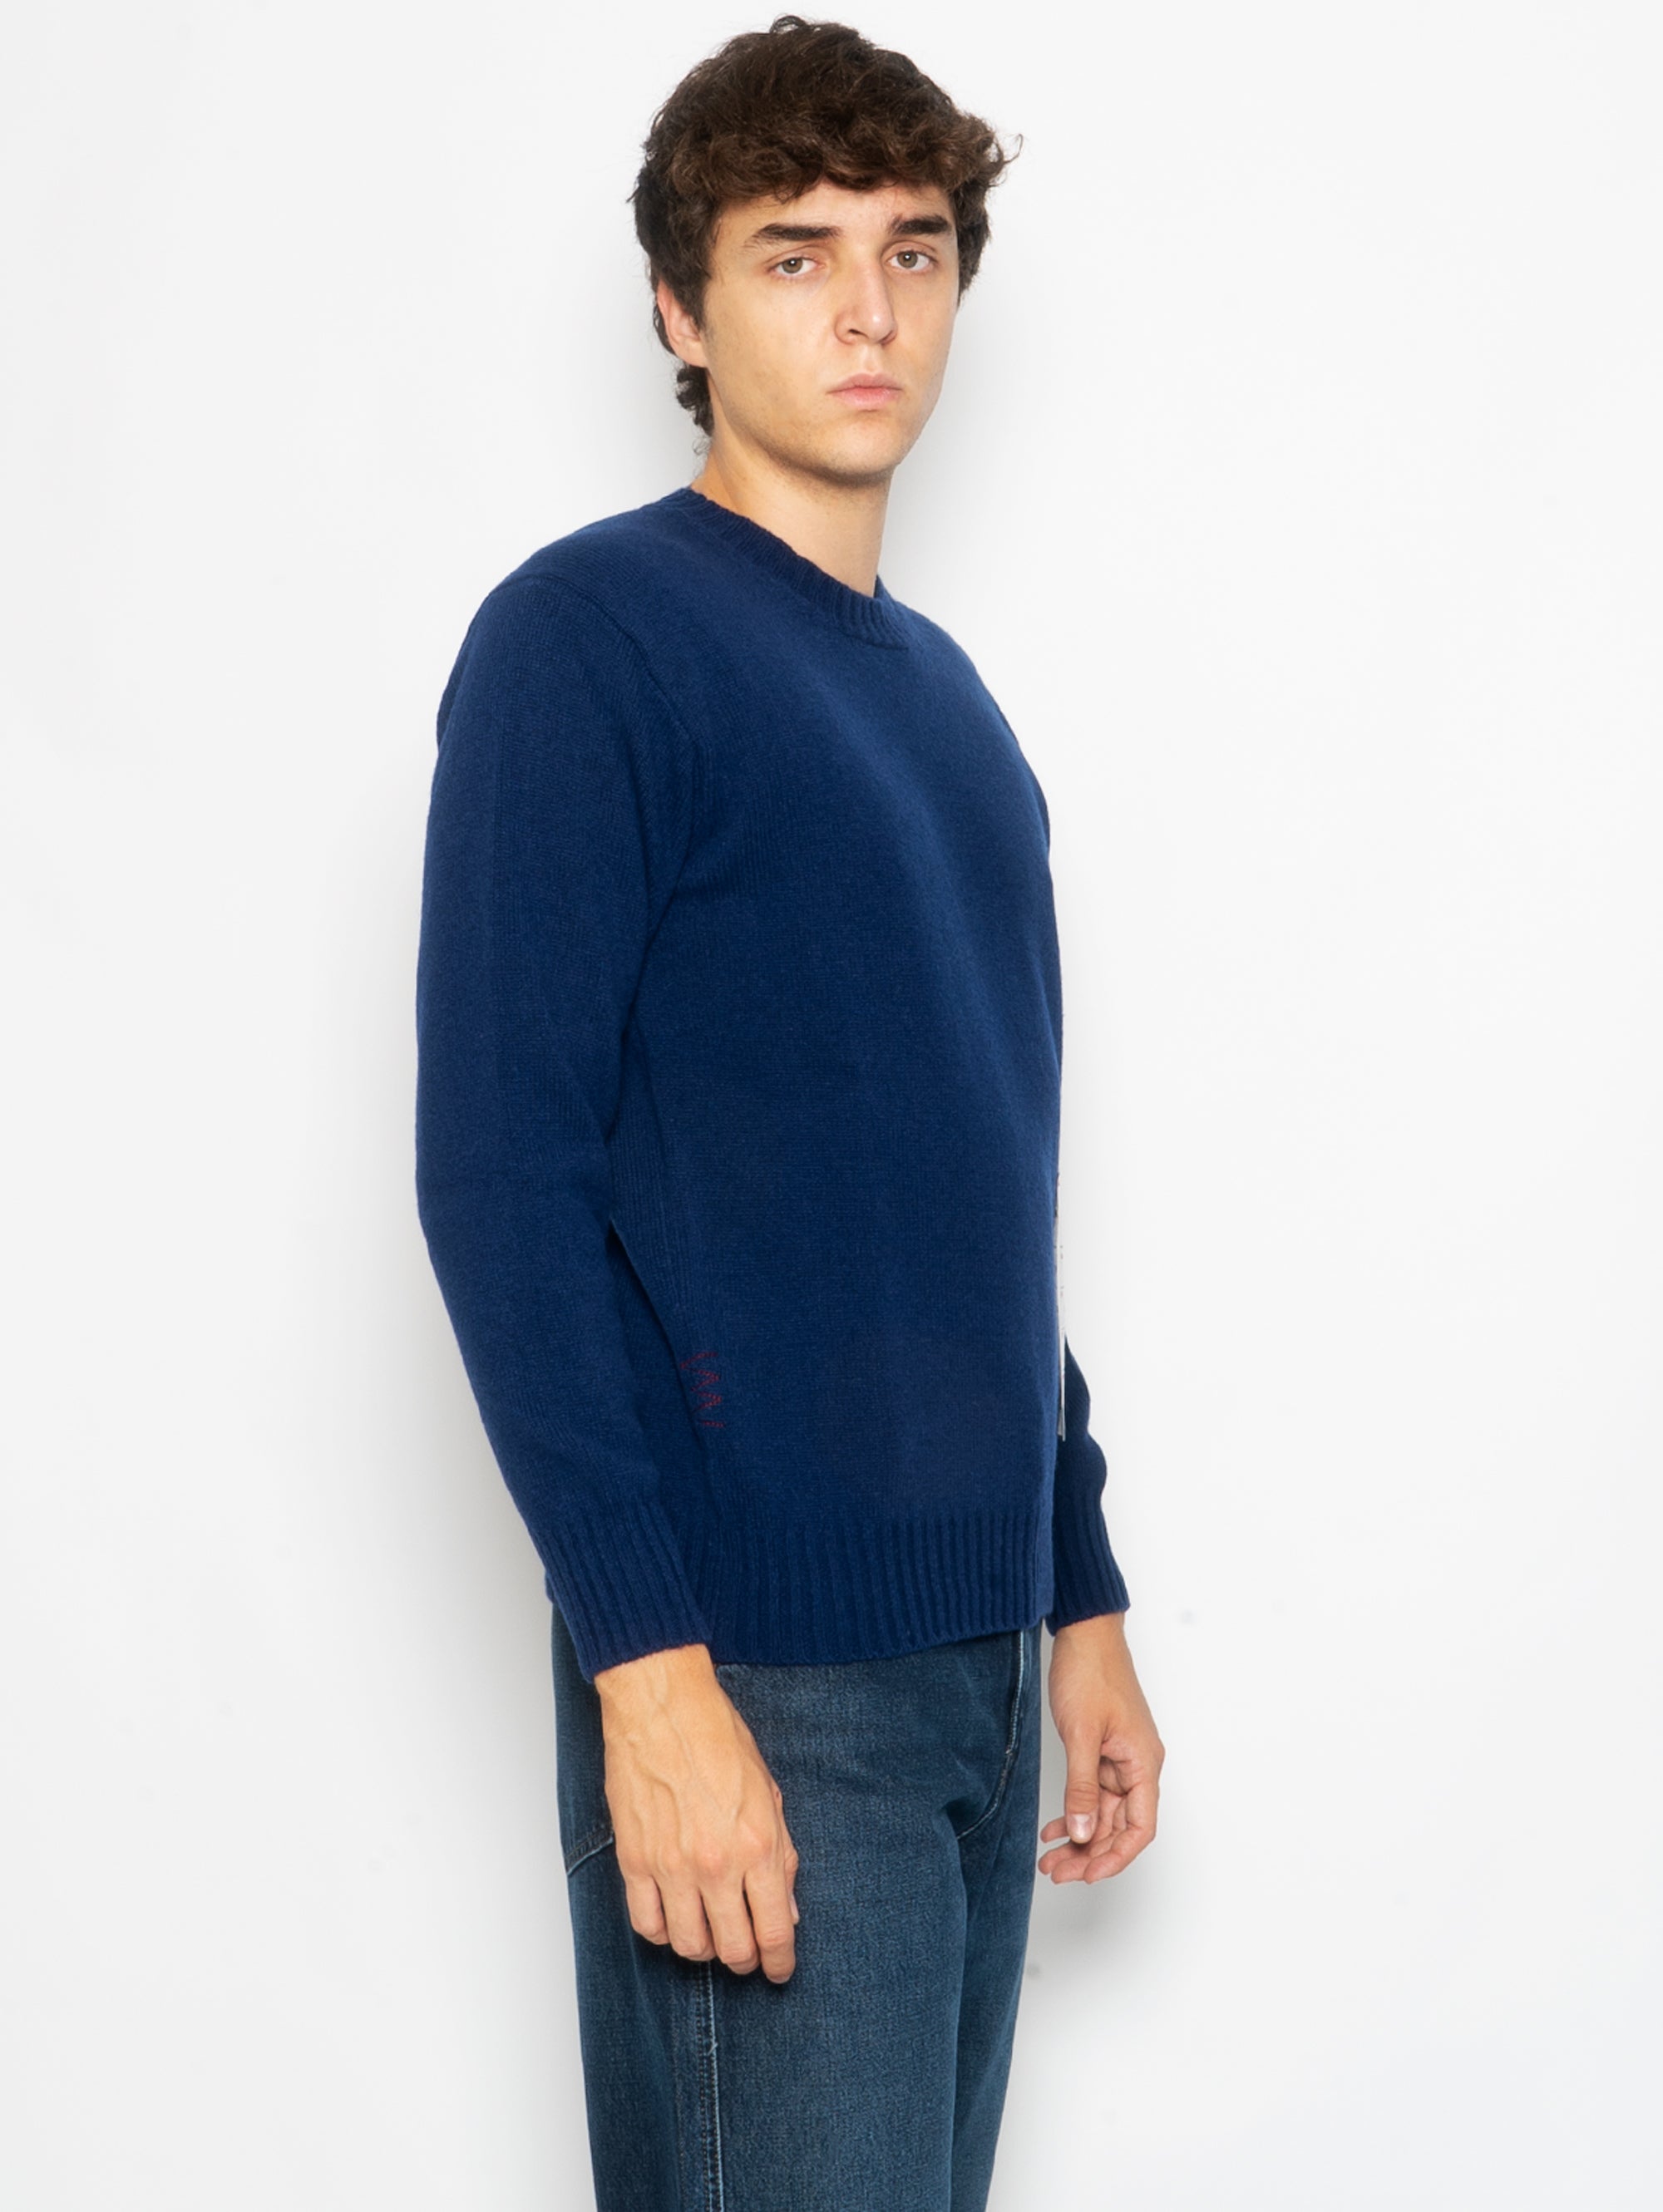 Blue Wool and Cashmere Crewneck Sweater